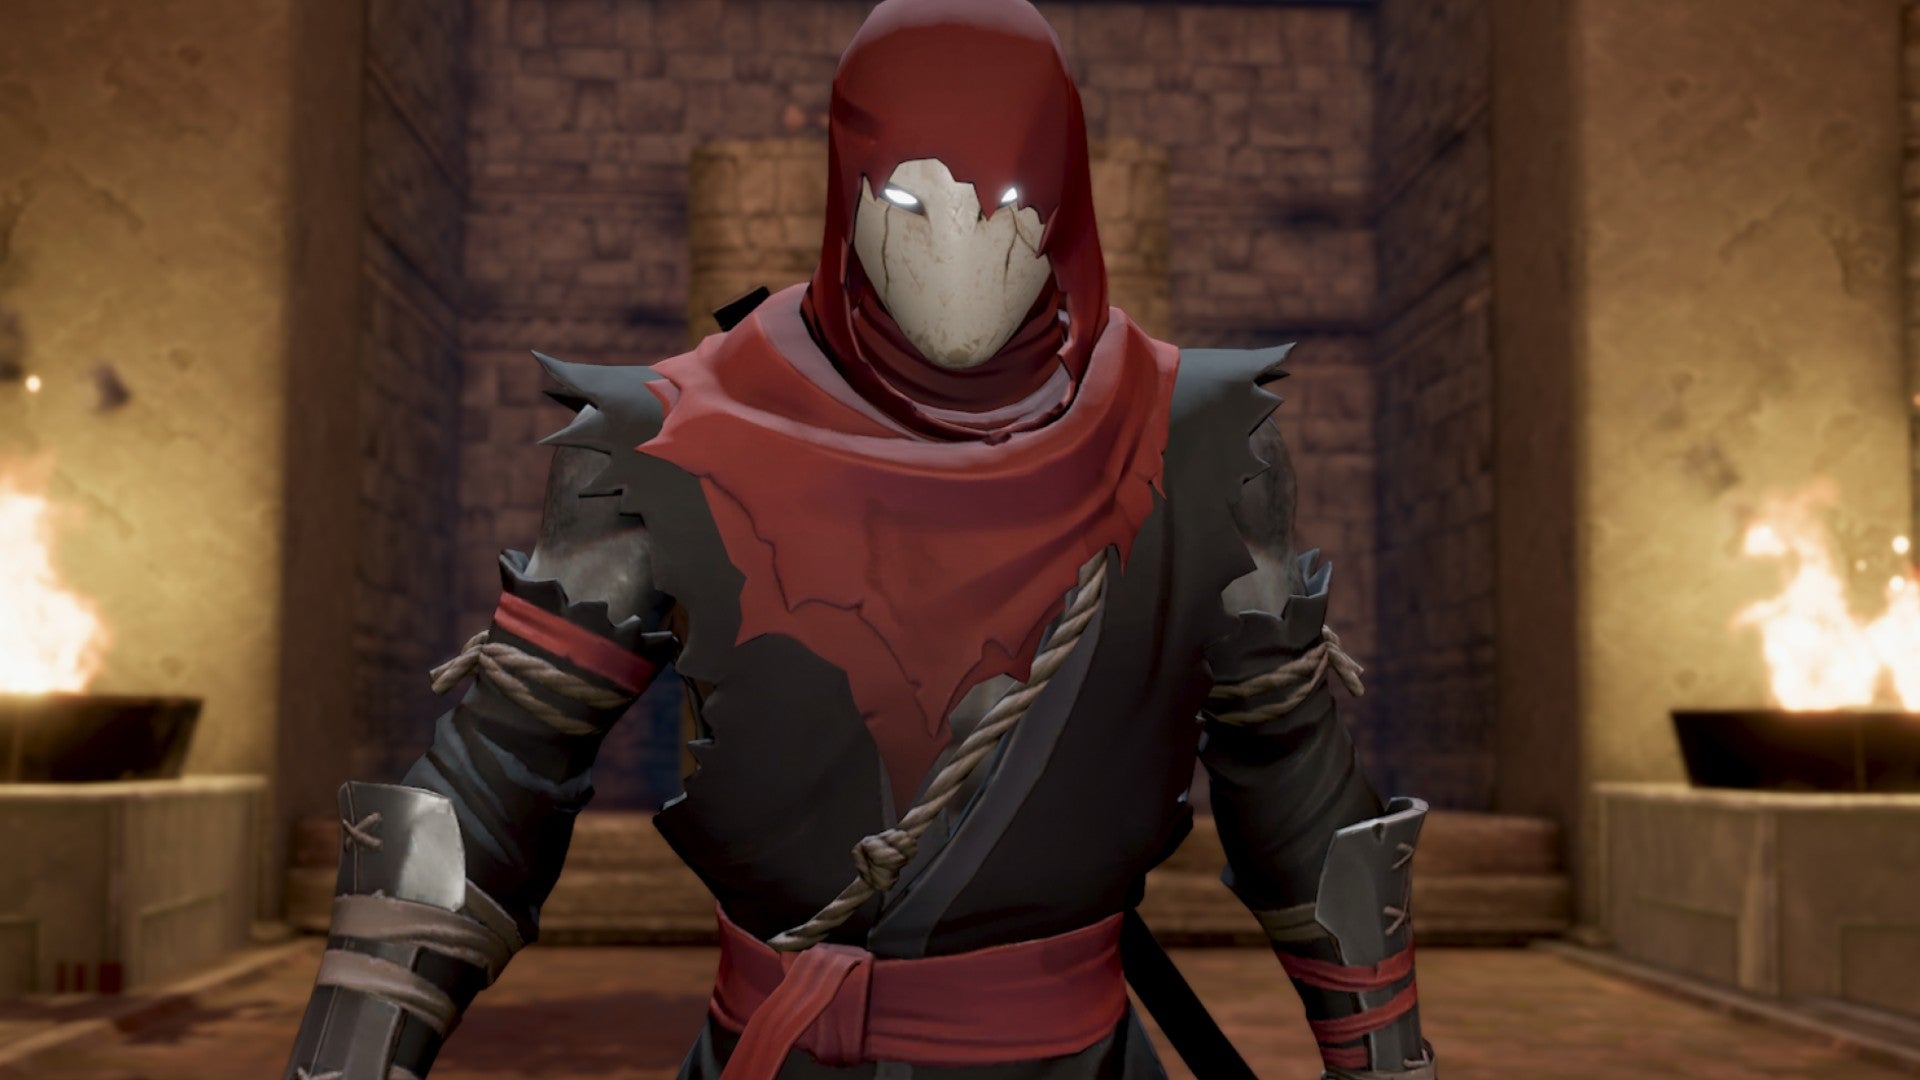 A close-up portrait of the main ninja character from Aragami 2